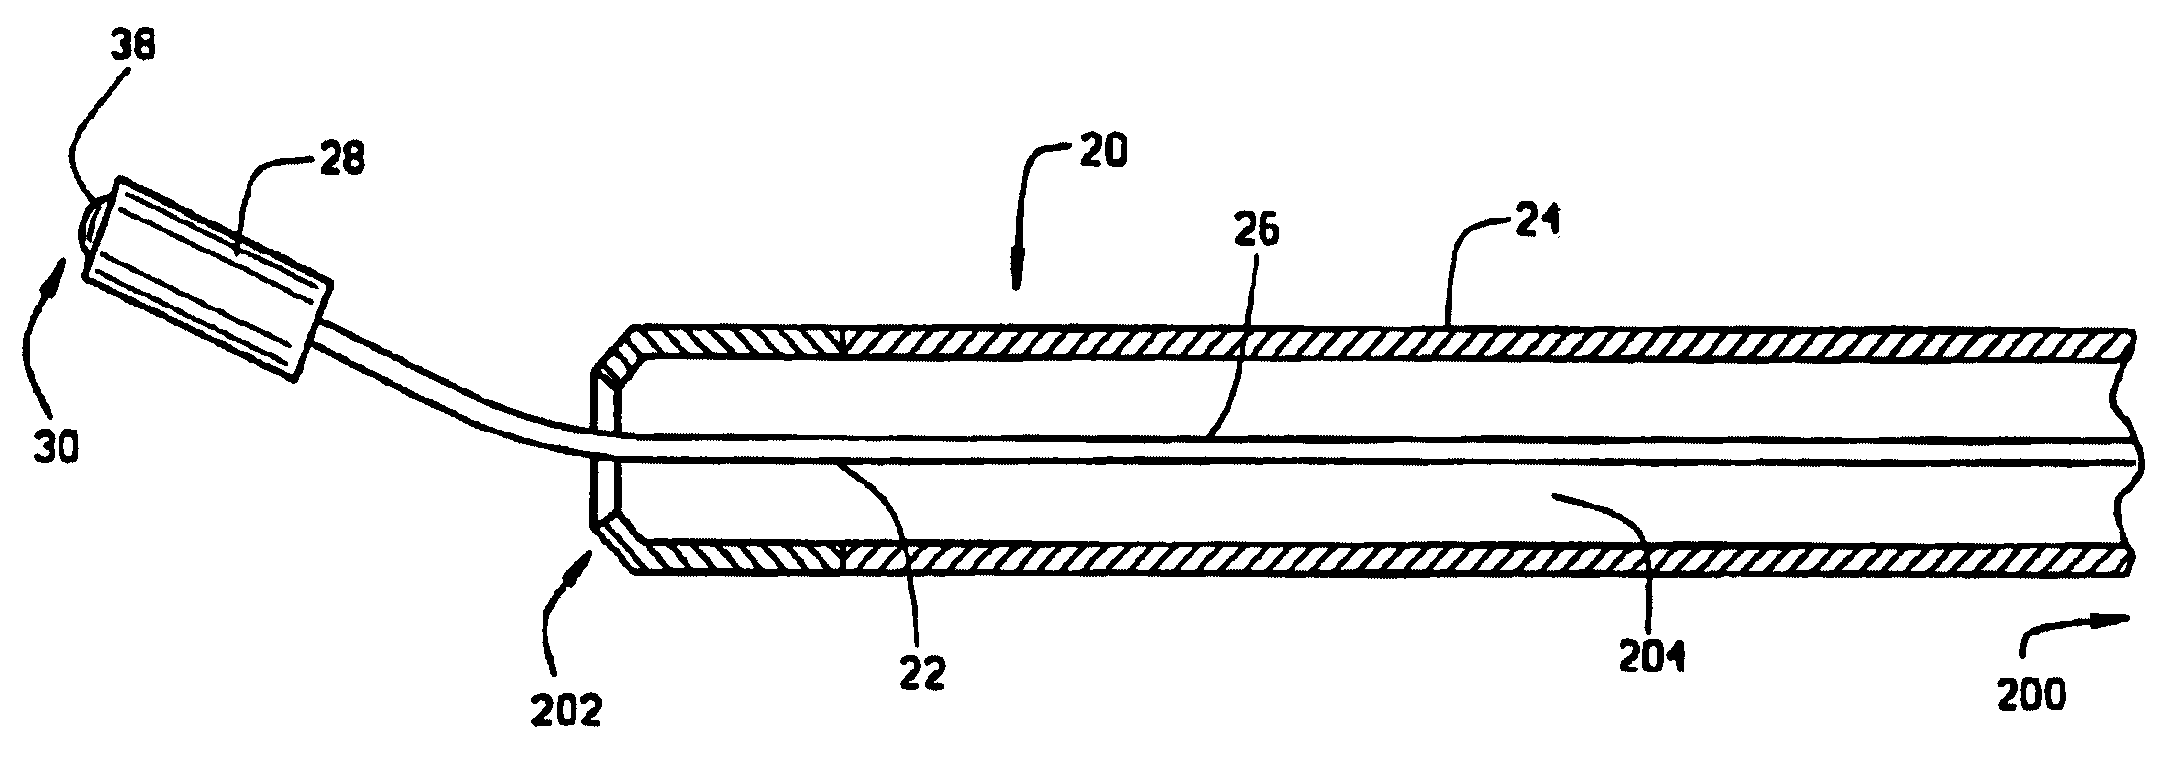 Method of and apparatus for navigating medical devices in body lumens by a guide wire with a magnetic tip